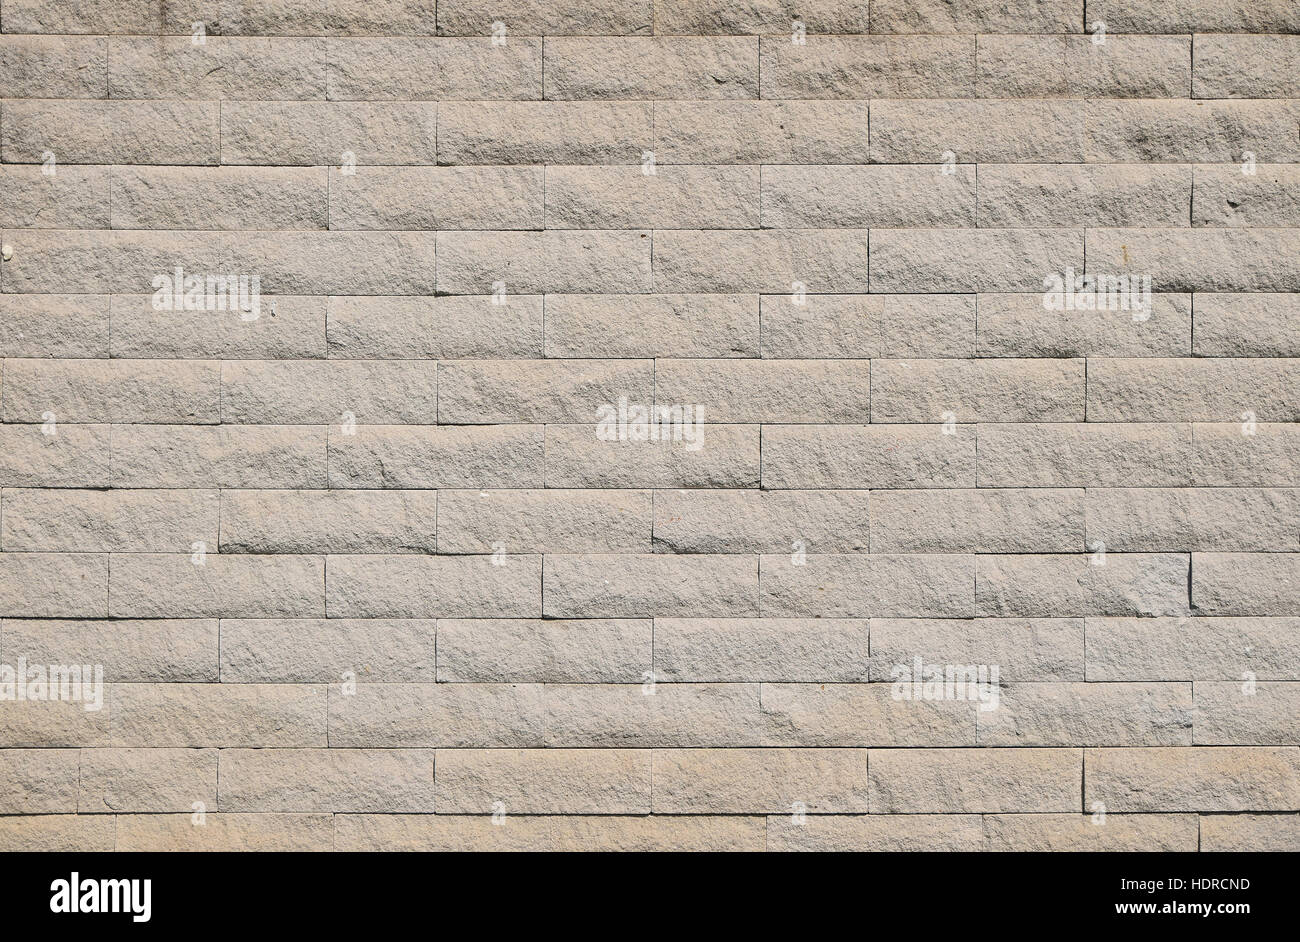 Beige white stone brick shaped tiles exterior wall background texture ...